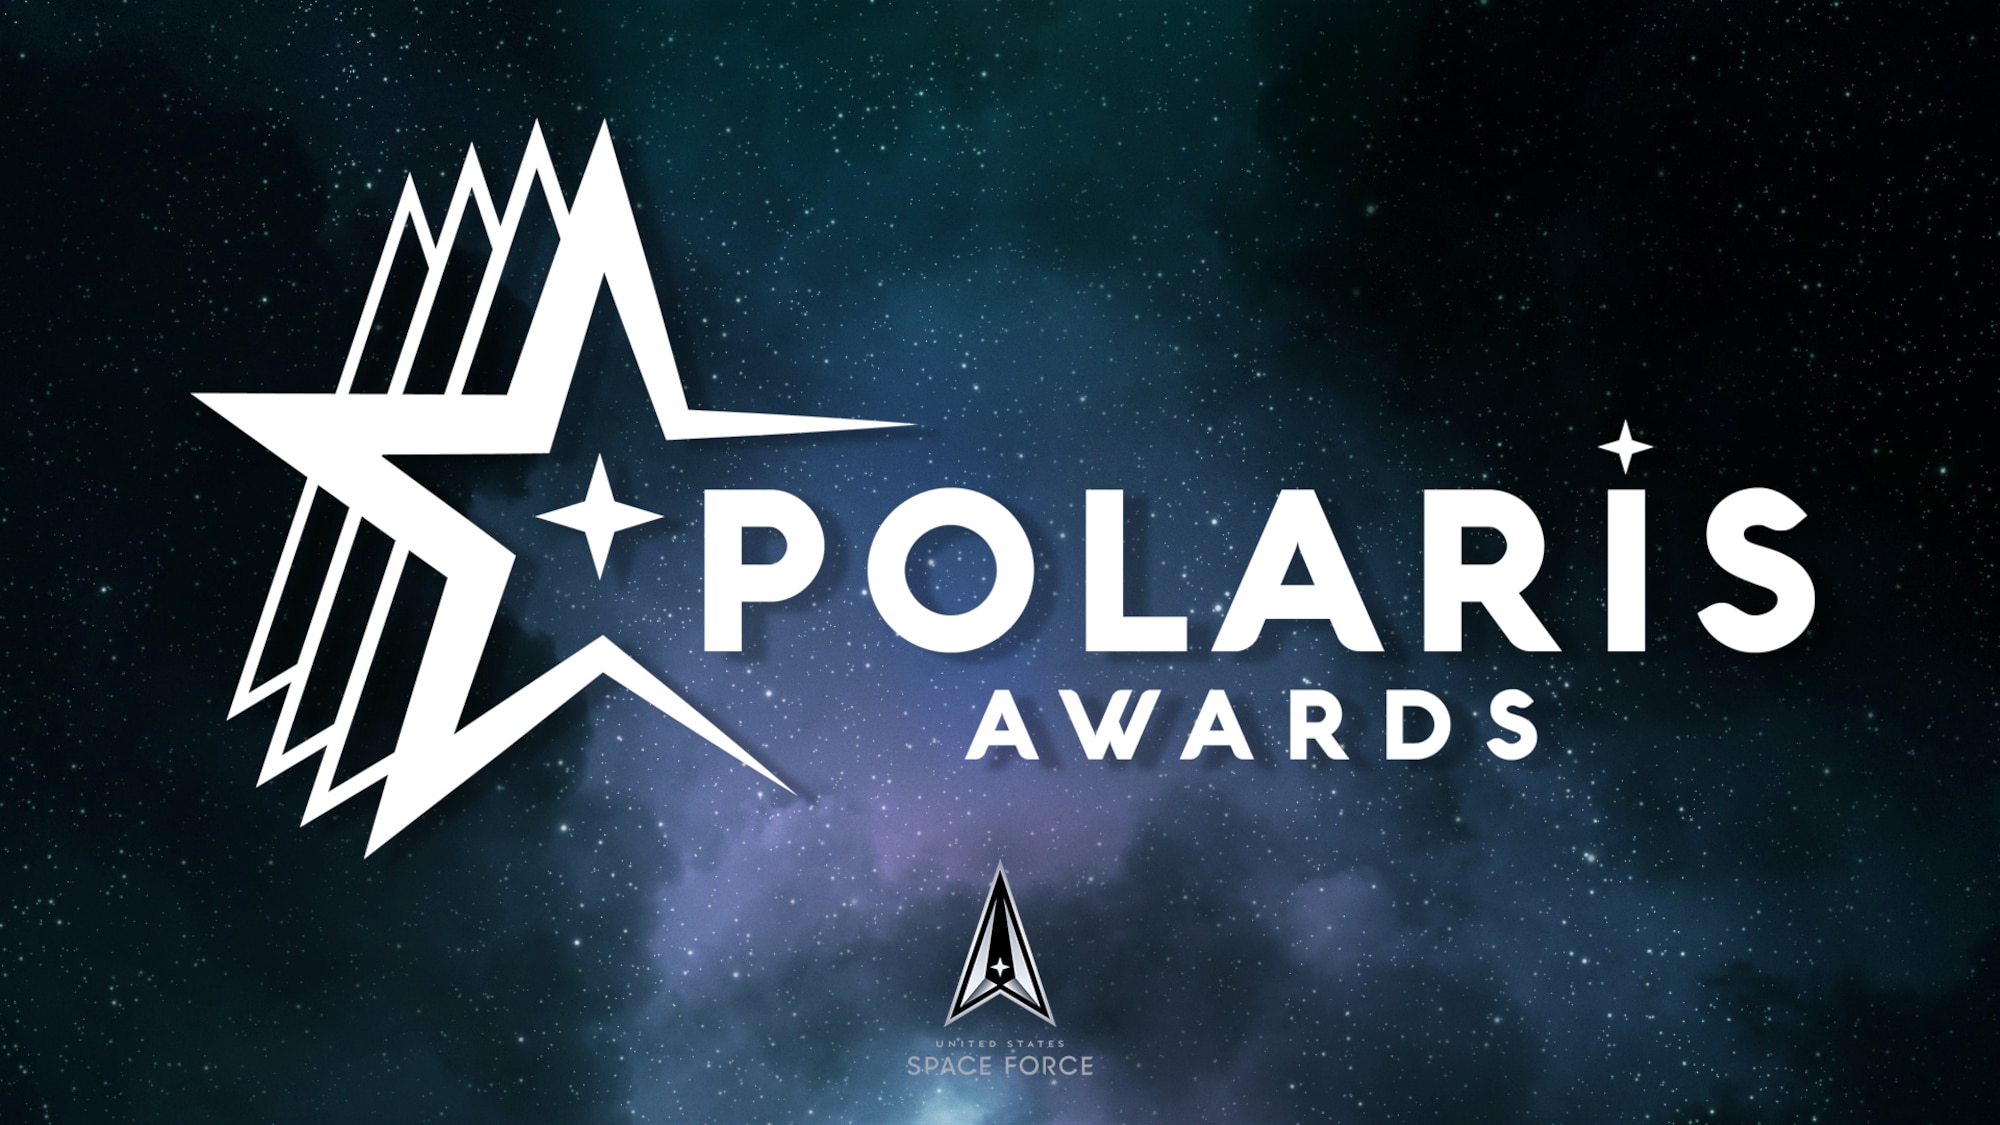 A graphic with text "POLARIS AWARDS" in white against a galaxy background.